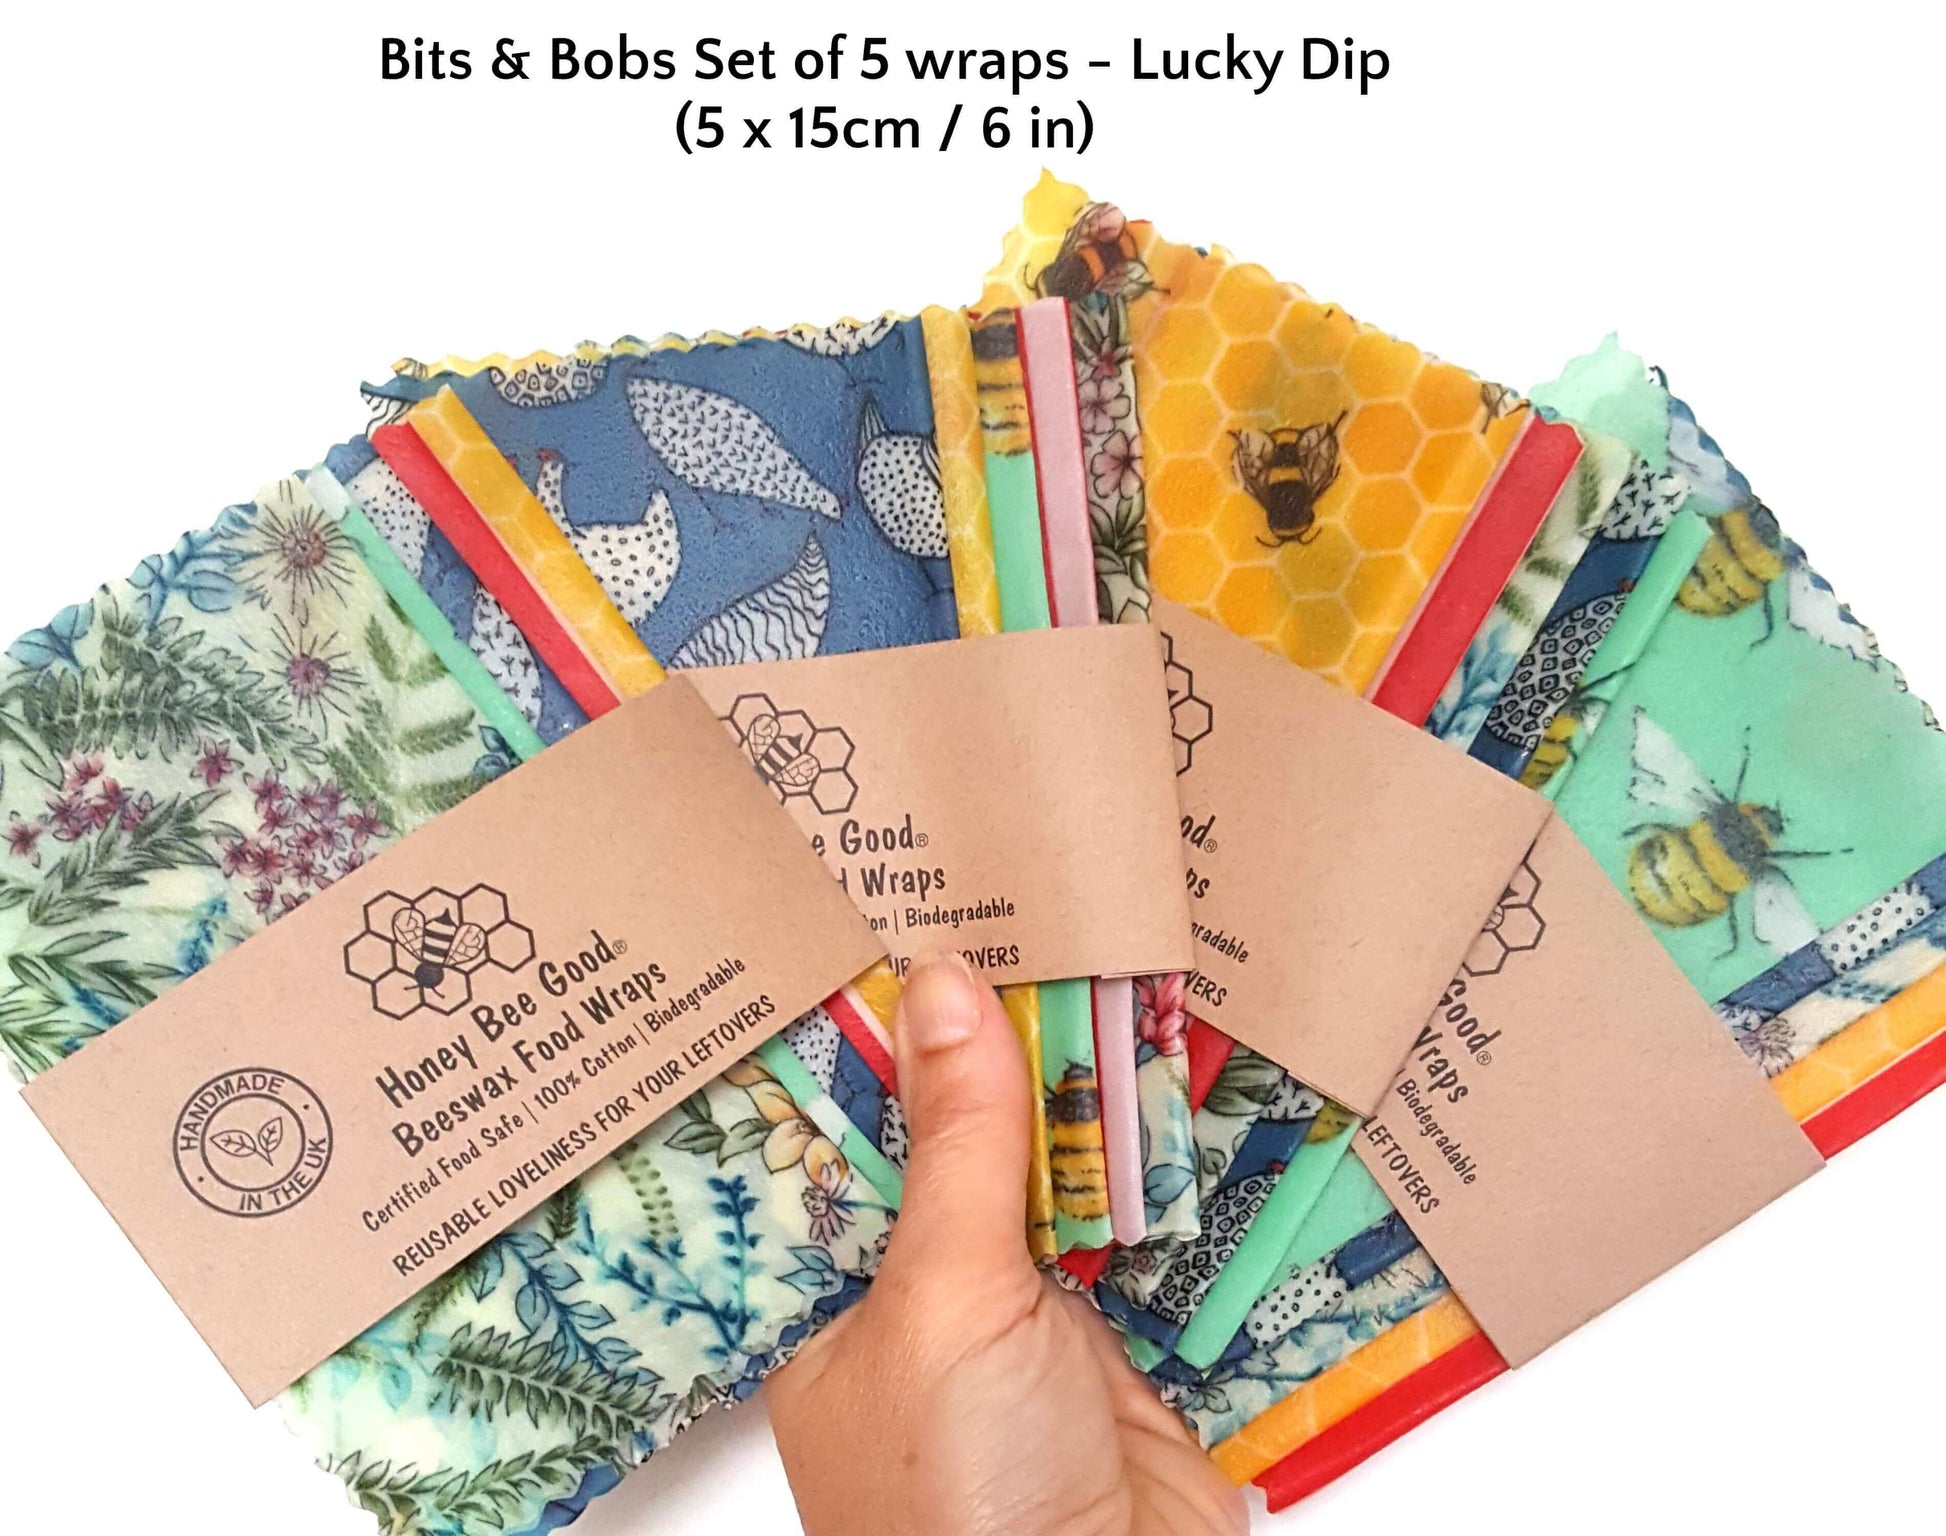 Reusable Beeswax Food Wraps 100% Hand Made in the UK by Honey Bee Good shown in Minis